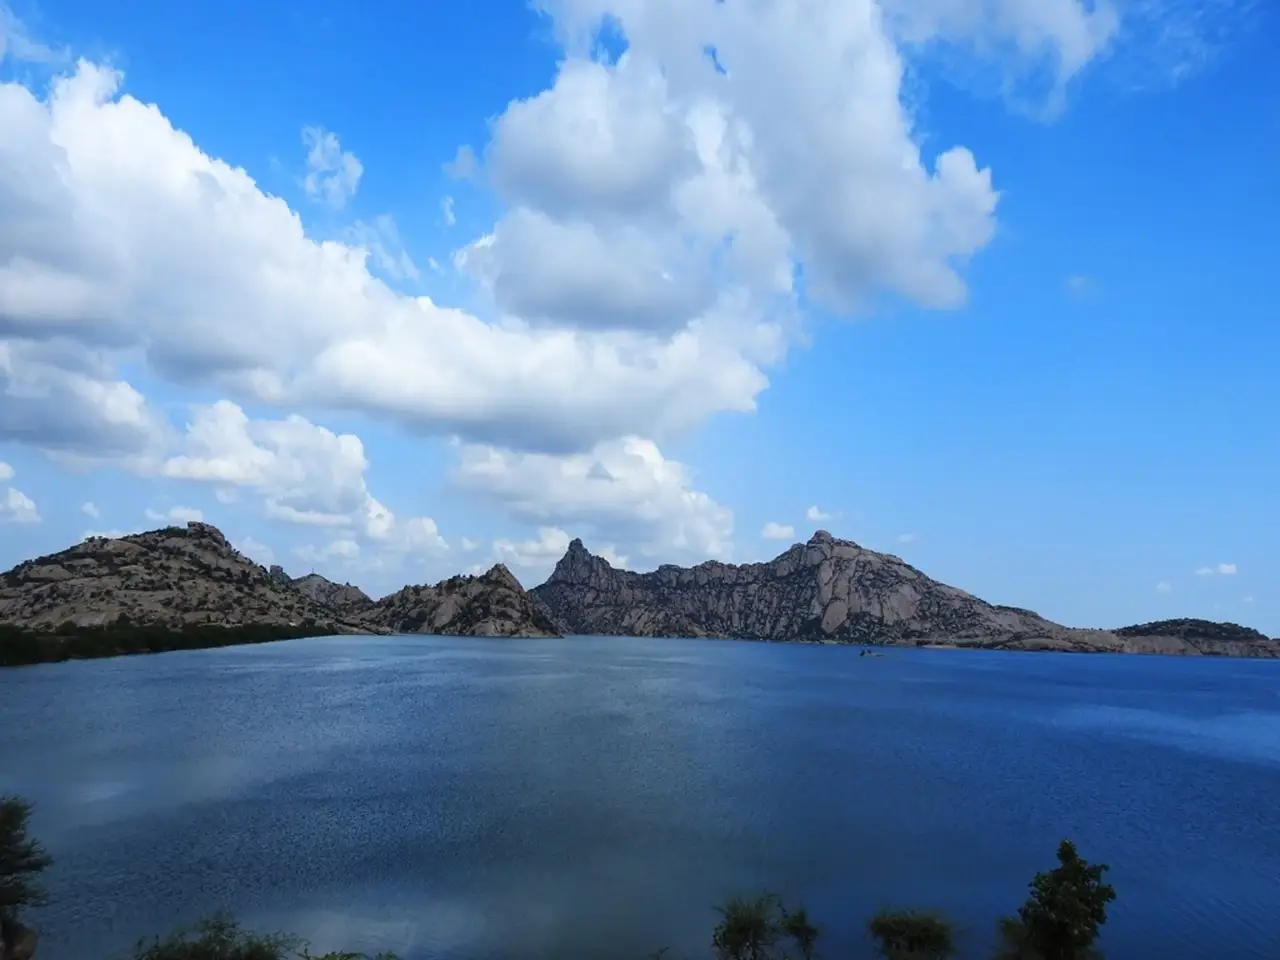 The wildlife sanctuaries in Jawai are renowned for hosting crocodiles, birds, and leopards.